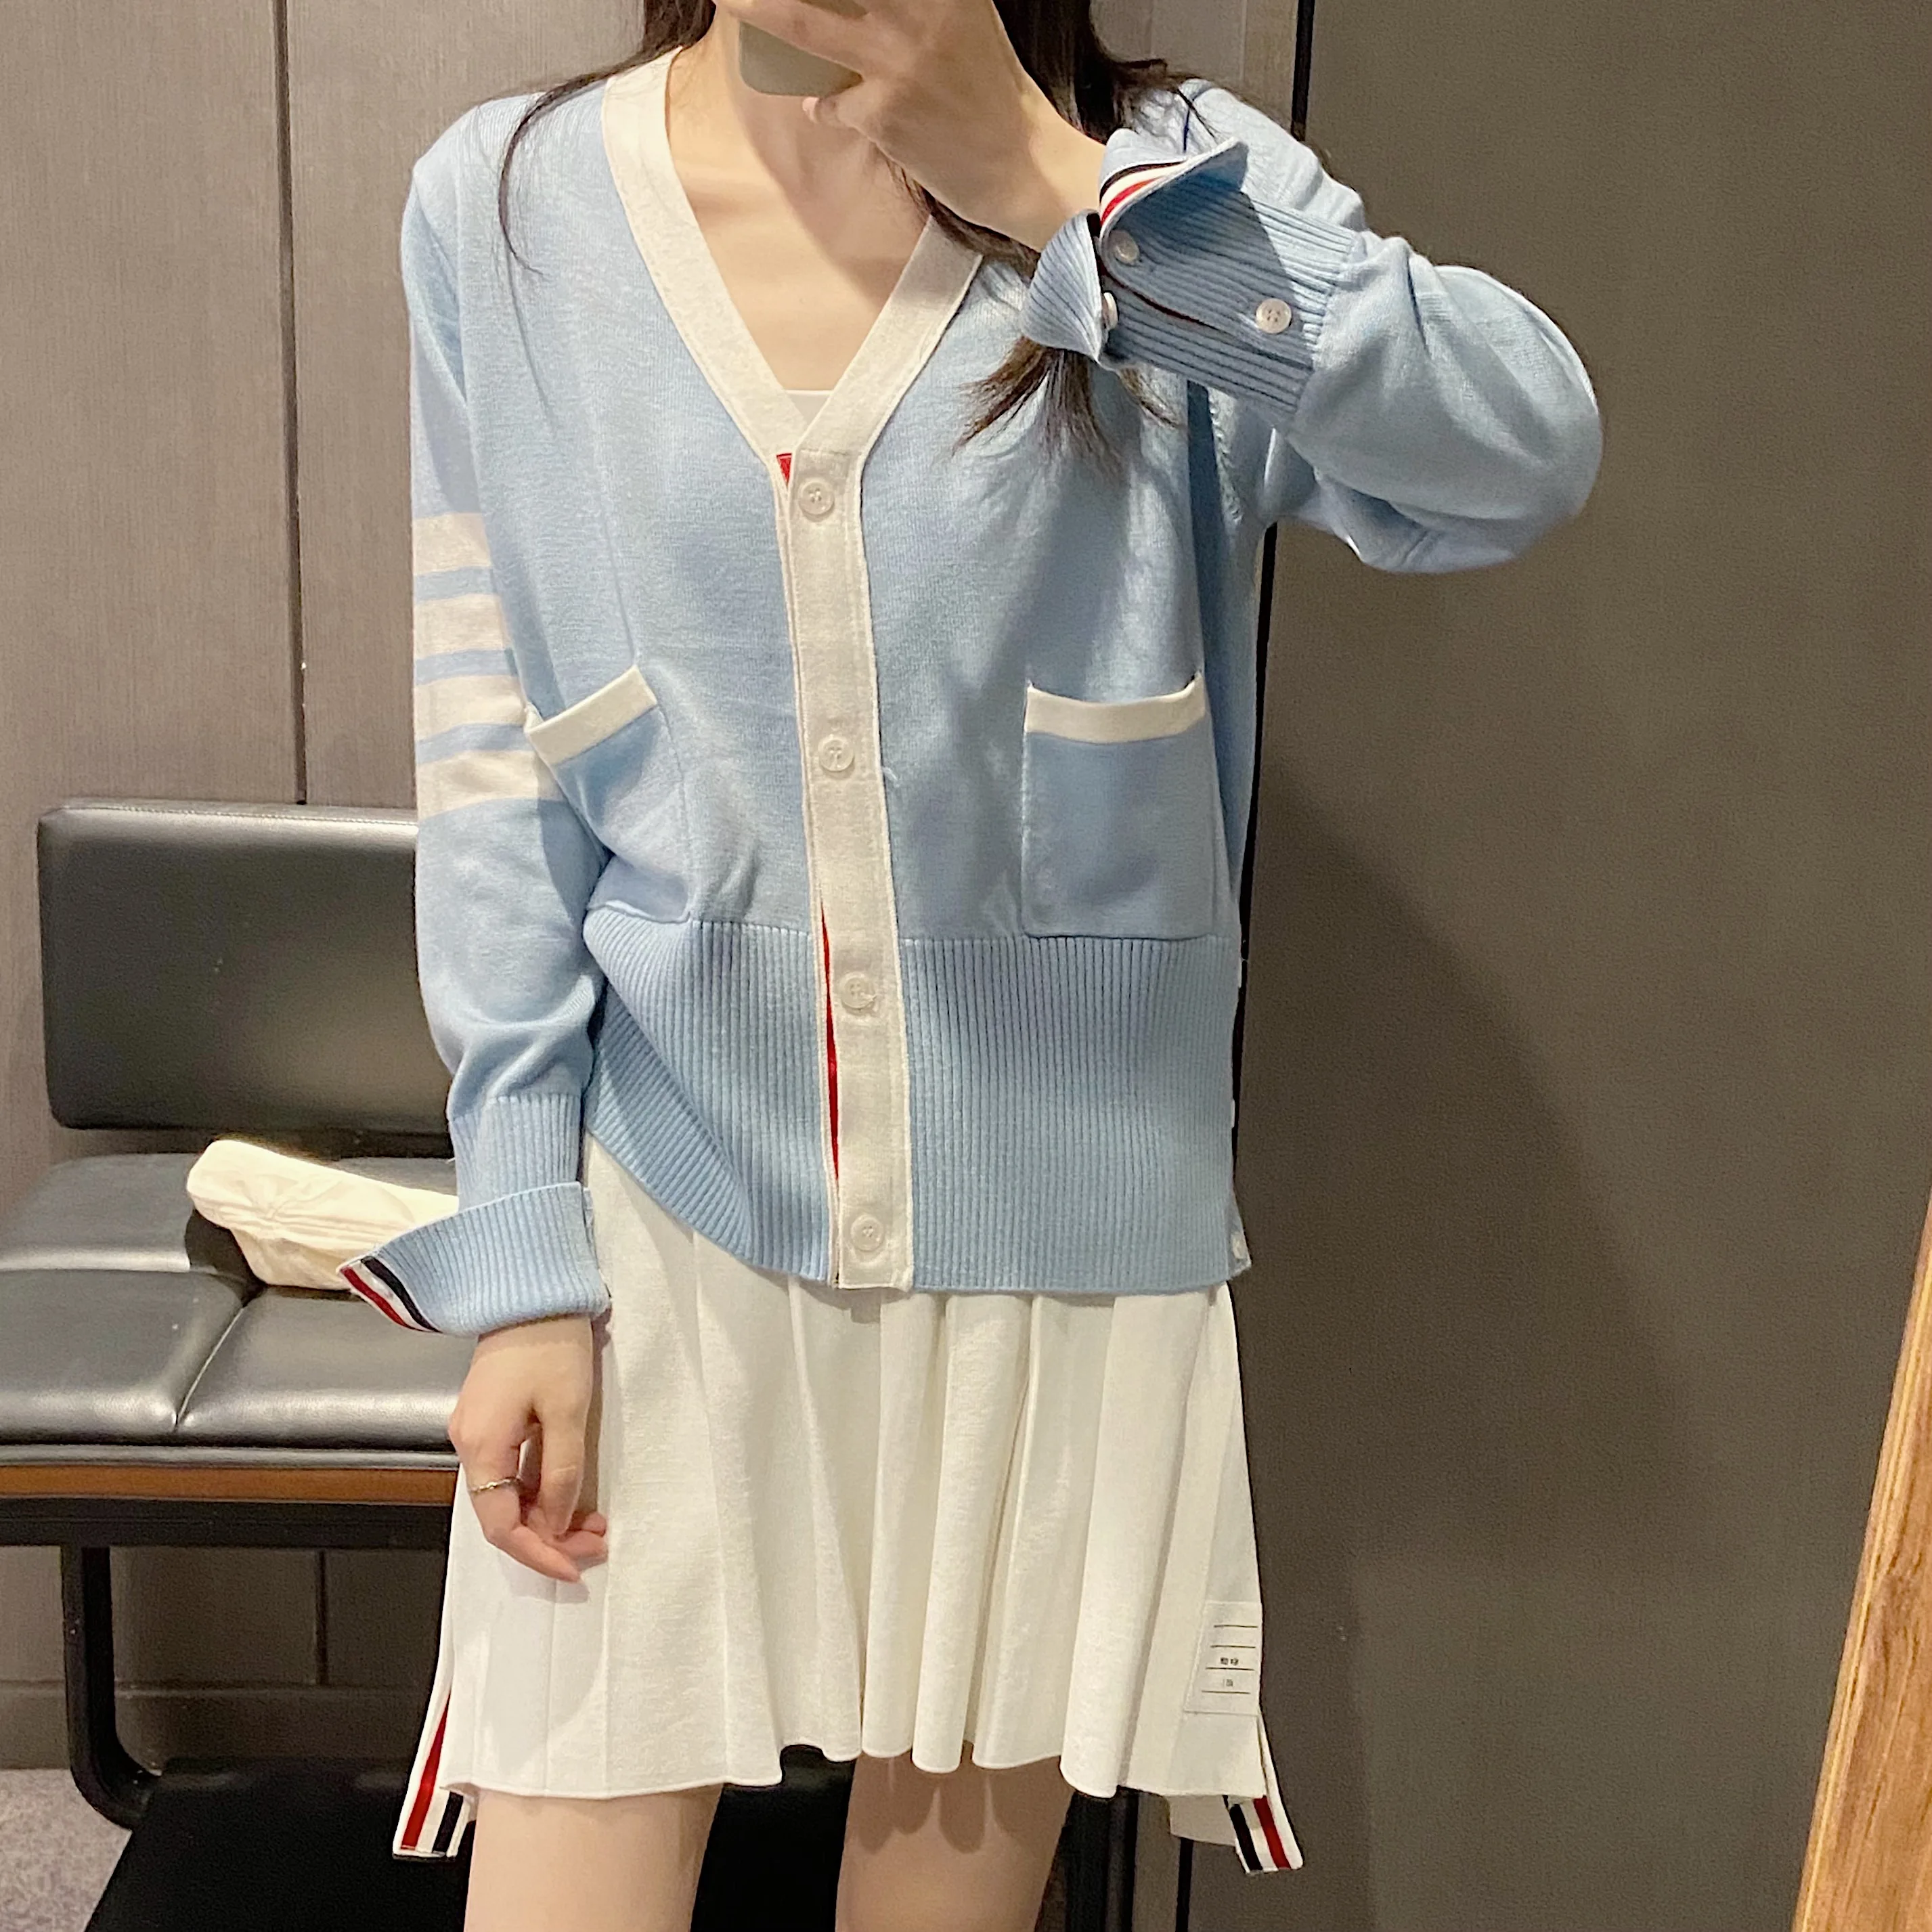 Wool Knitted Sweater, TB High-quality Fashion Women's Coat, V Necked Stripes, Thin College Style Spring and Autumn Sweater Top